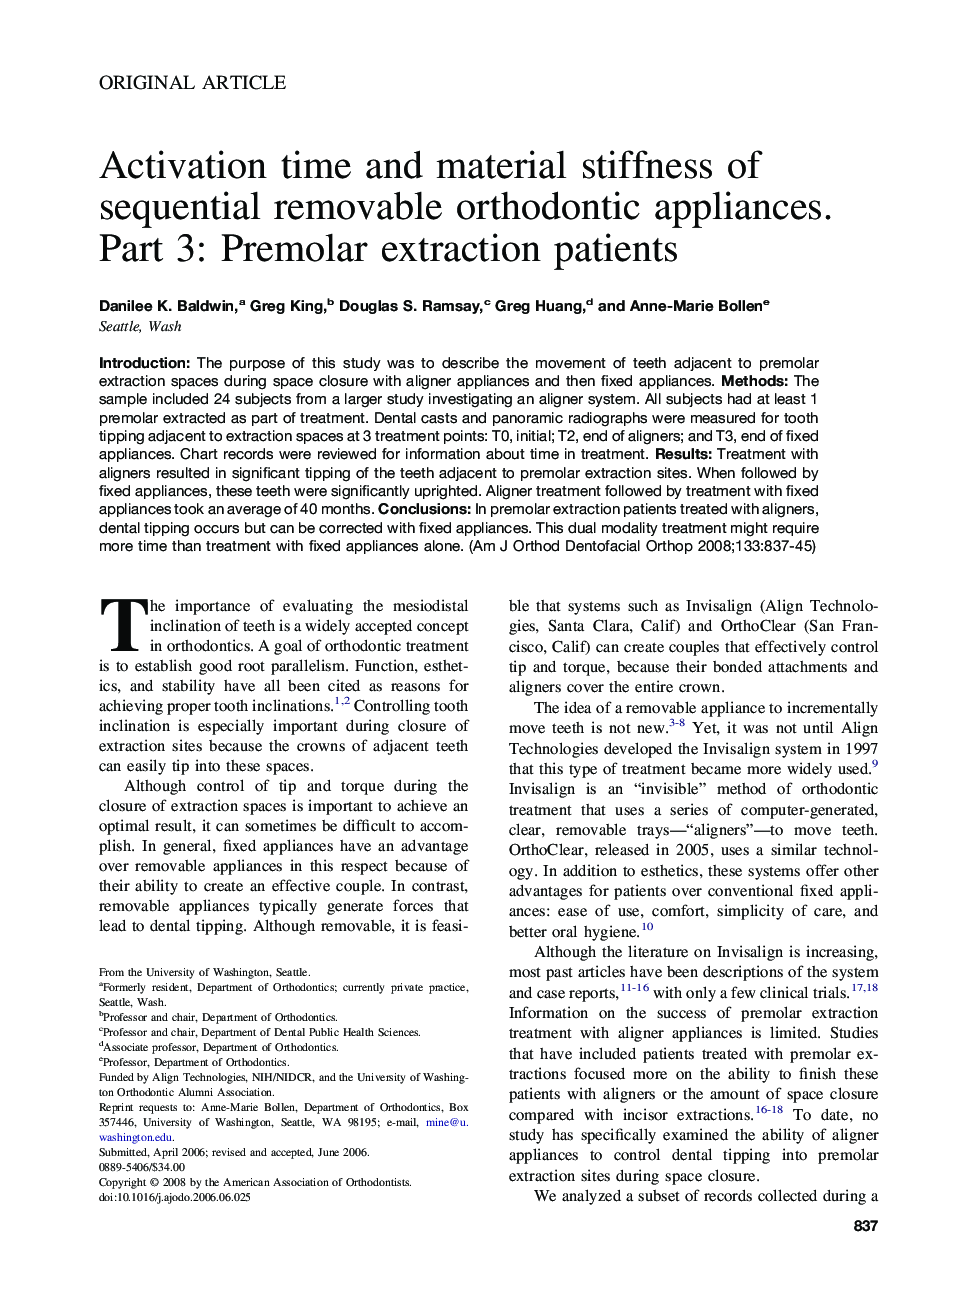 Activation time and material stiffness of sequential removable orthodontic appliances. Part 3: Premolar extraction patients 